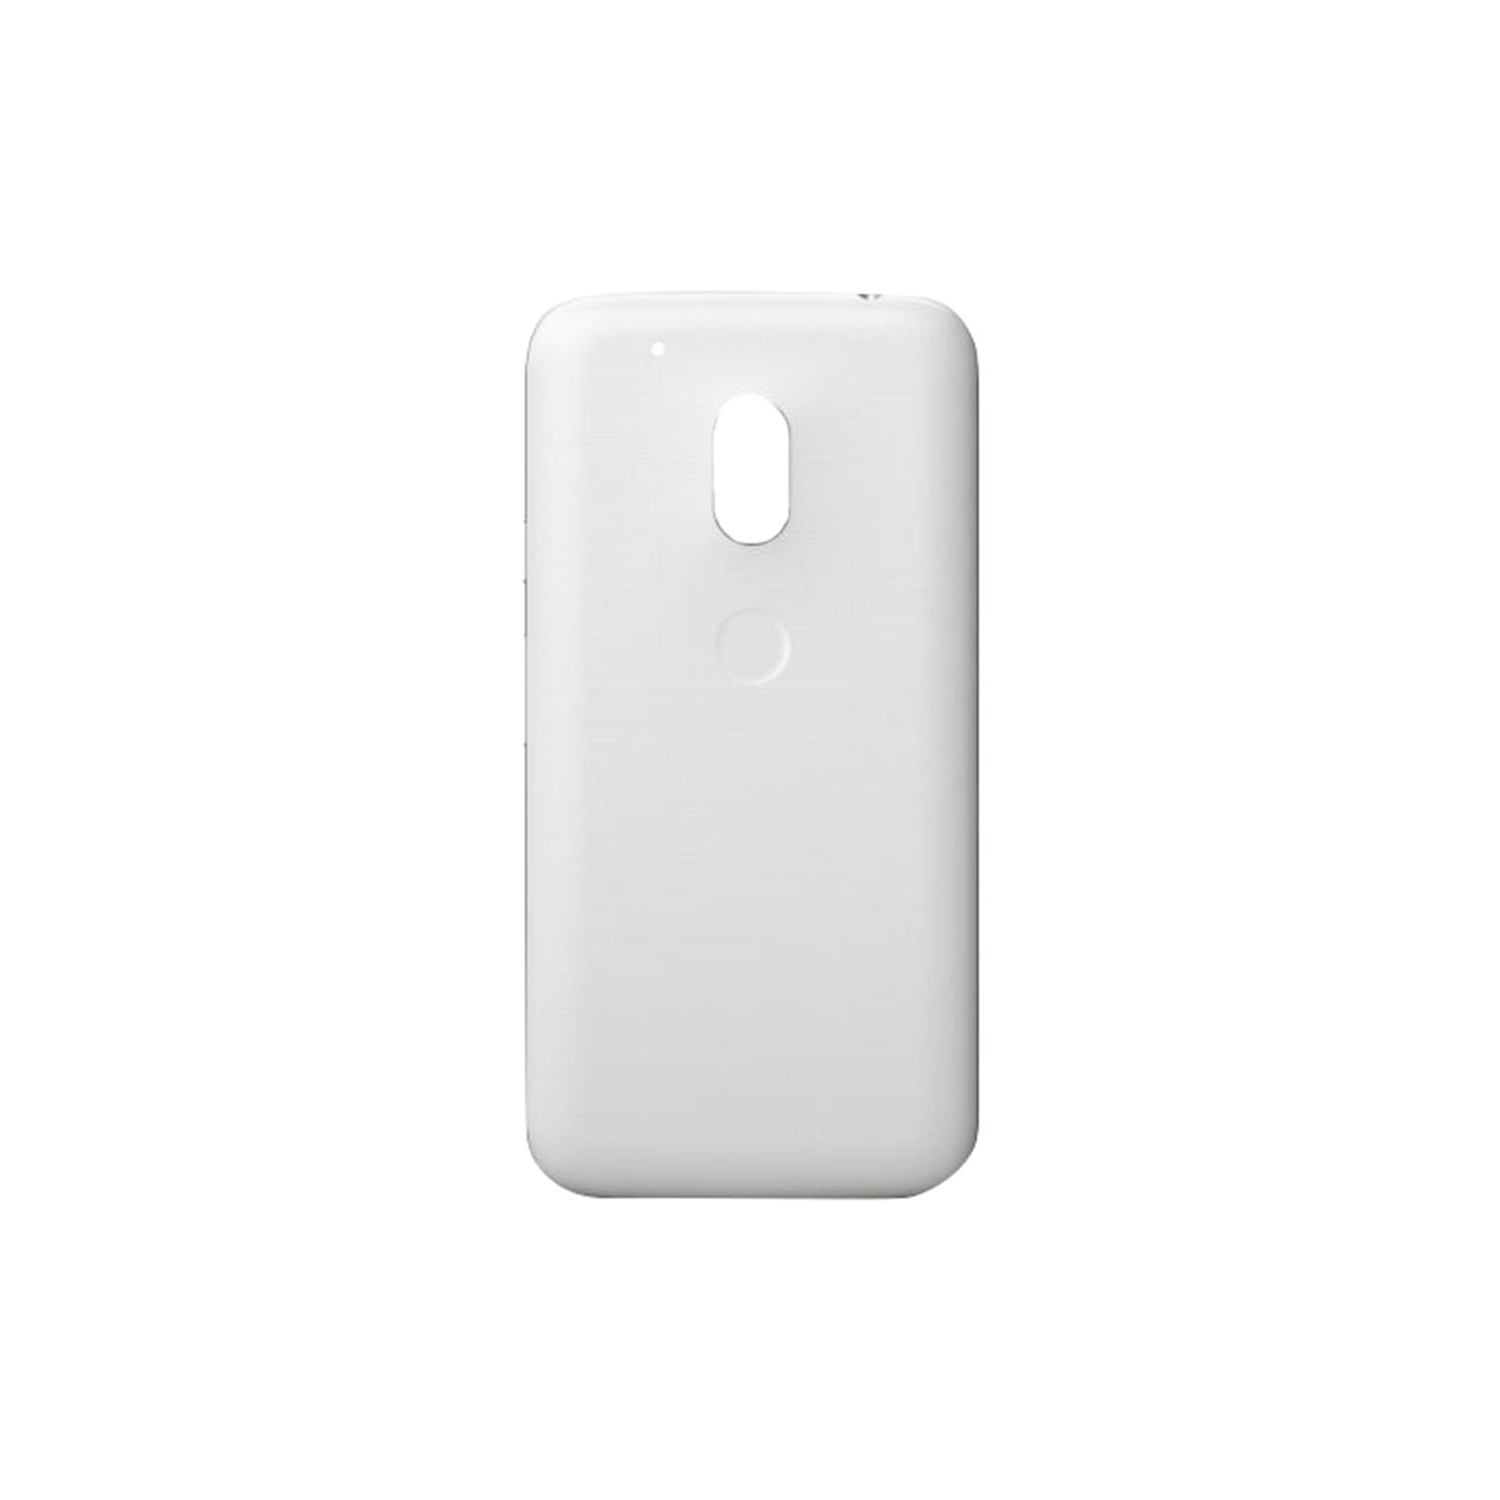 Replacement Battery Back Housing Cover Compatible With Motorola Moto G4 Play - White